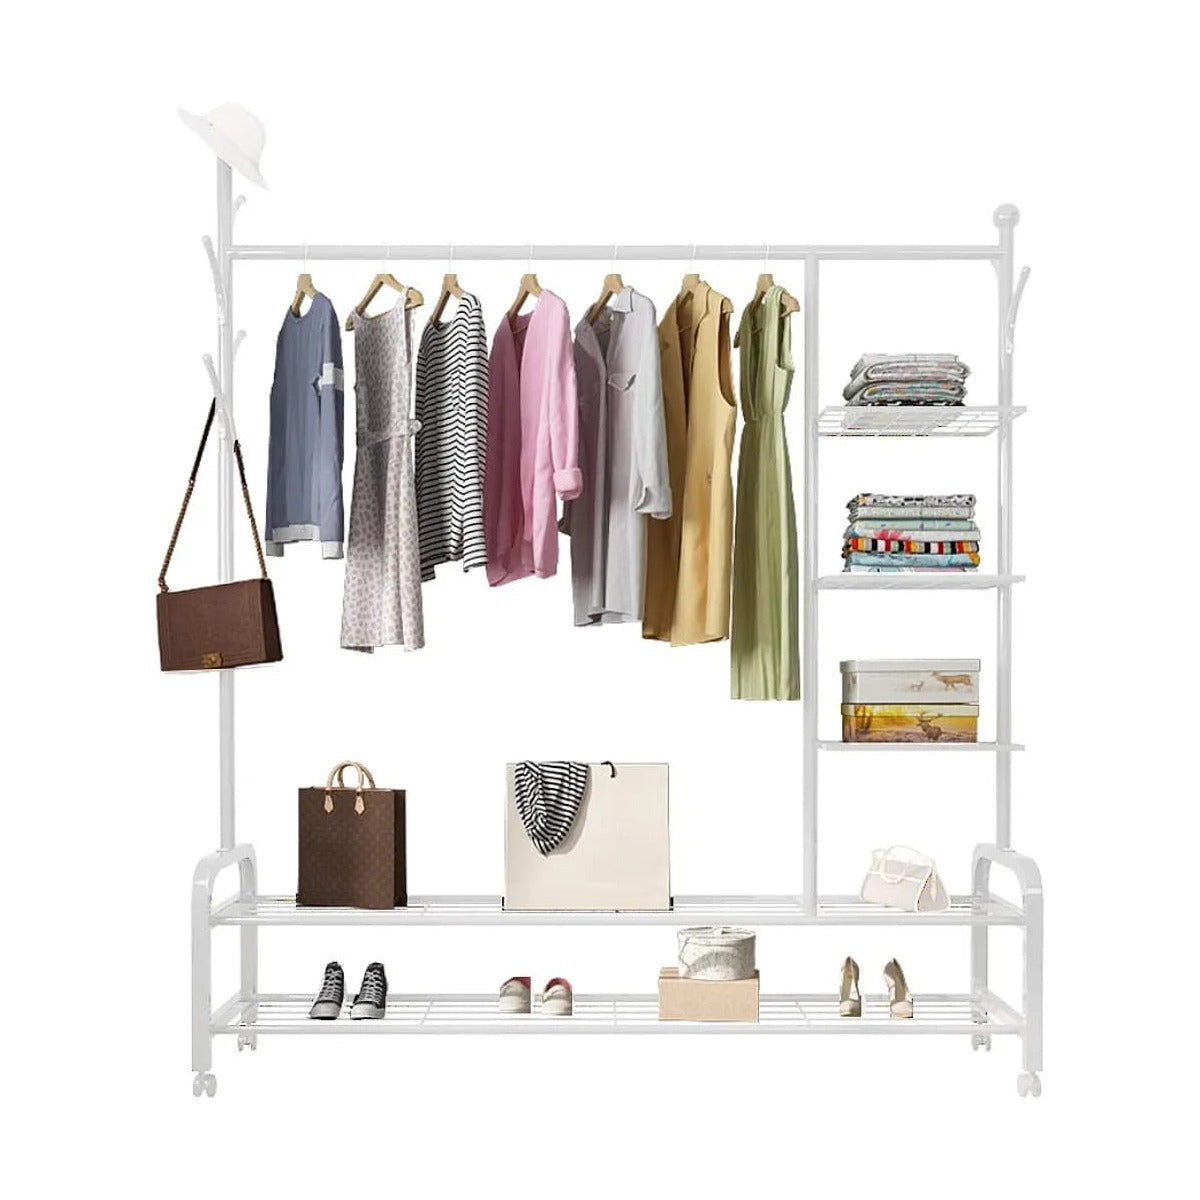  Movable Cloth Display Stand in White Color.